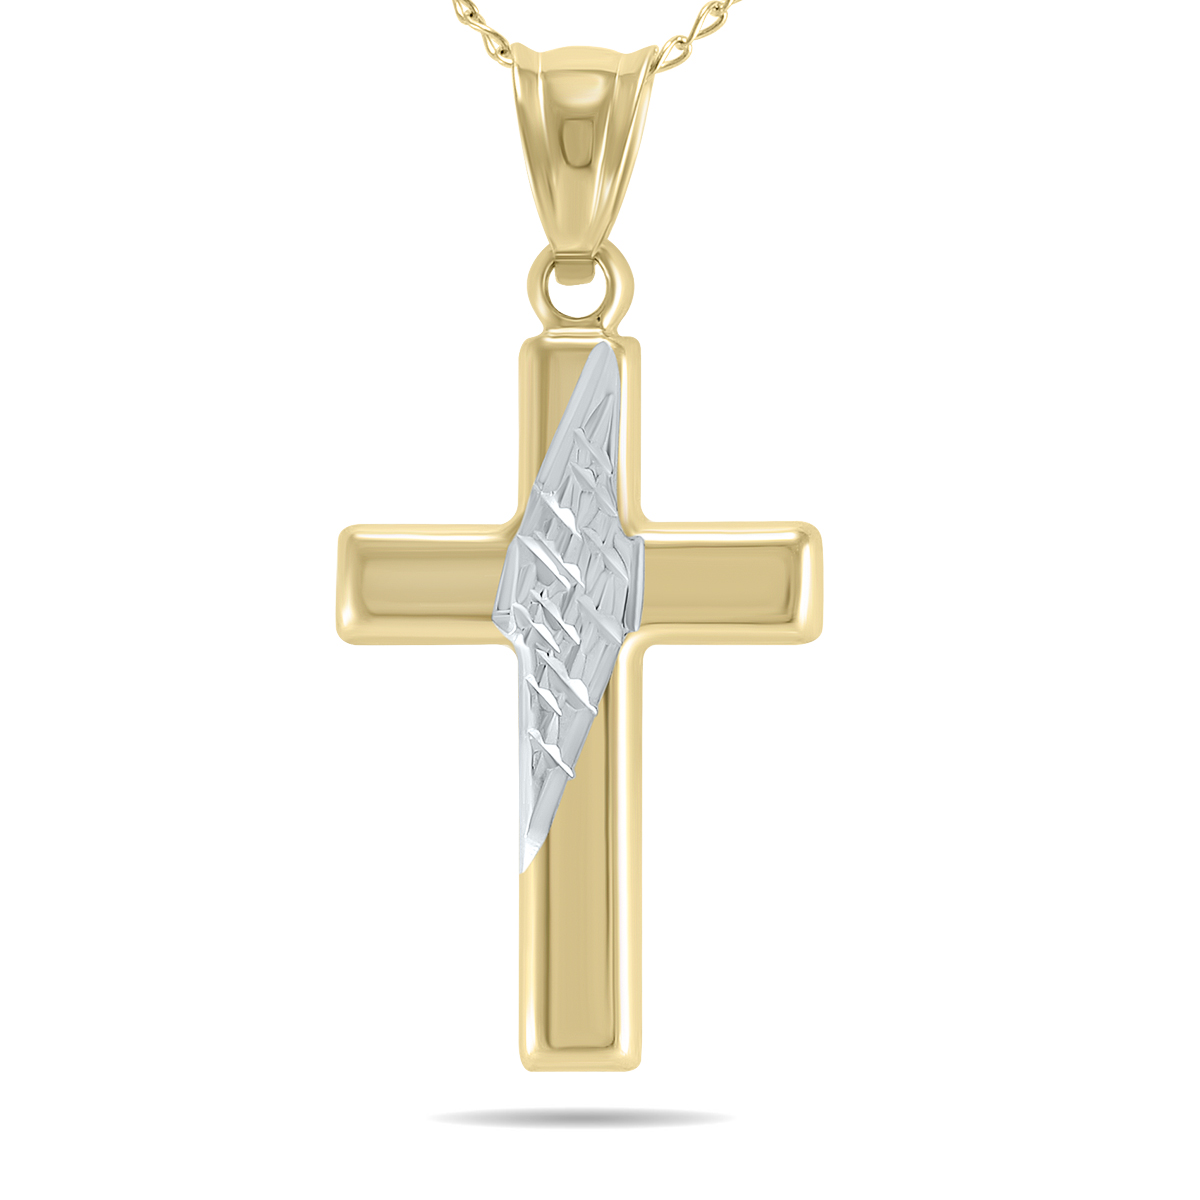 Contemporary 10K Yellow Gold Cross Pendant with Rhodium Accent and 18 Inch Chain